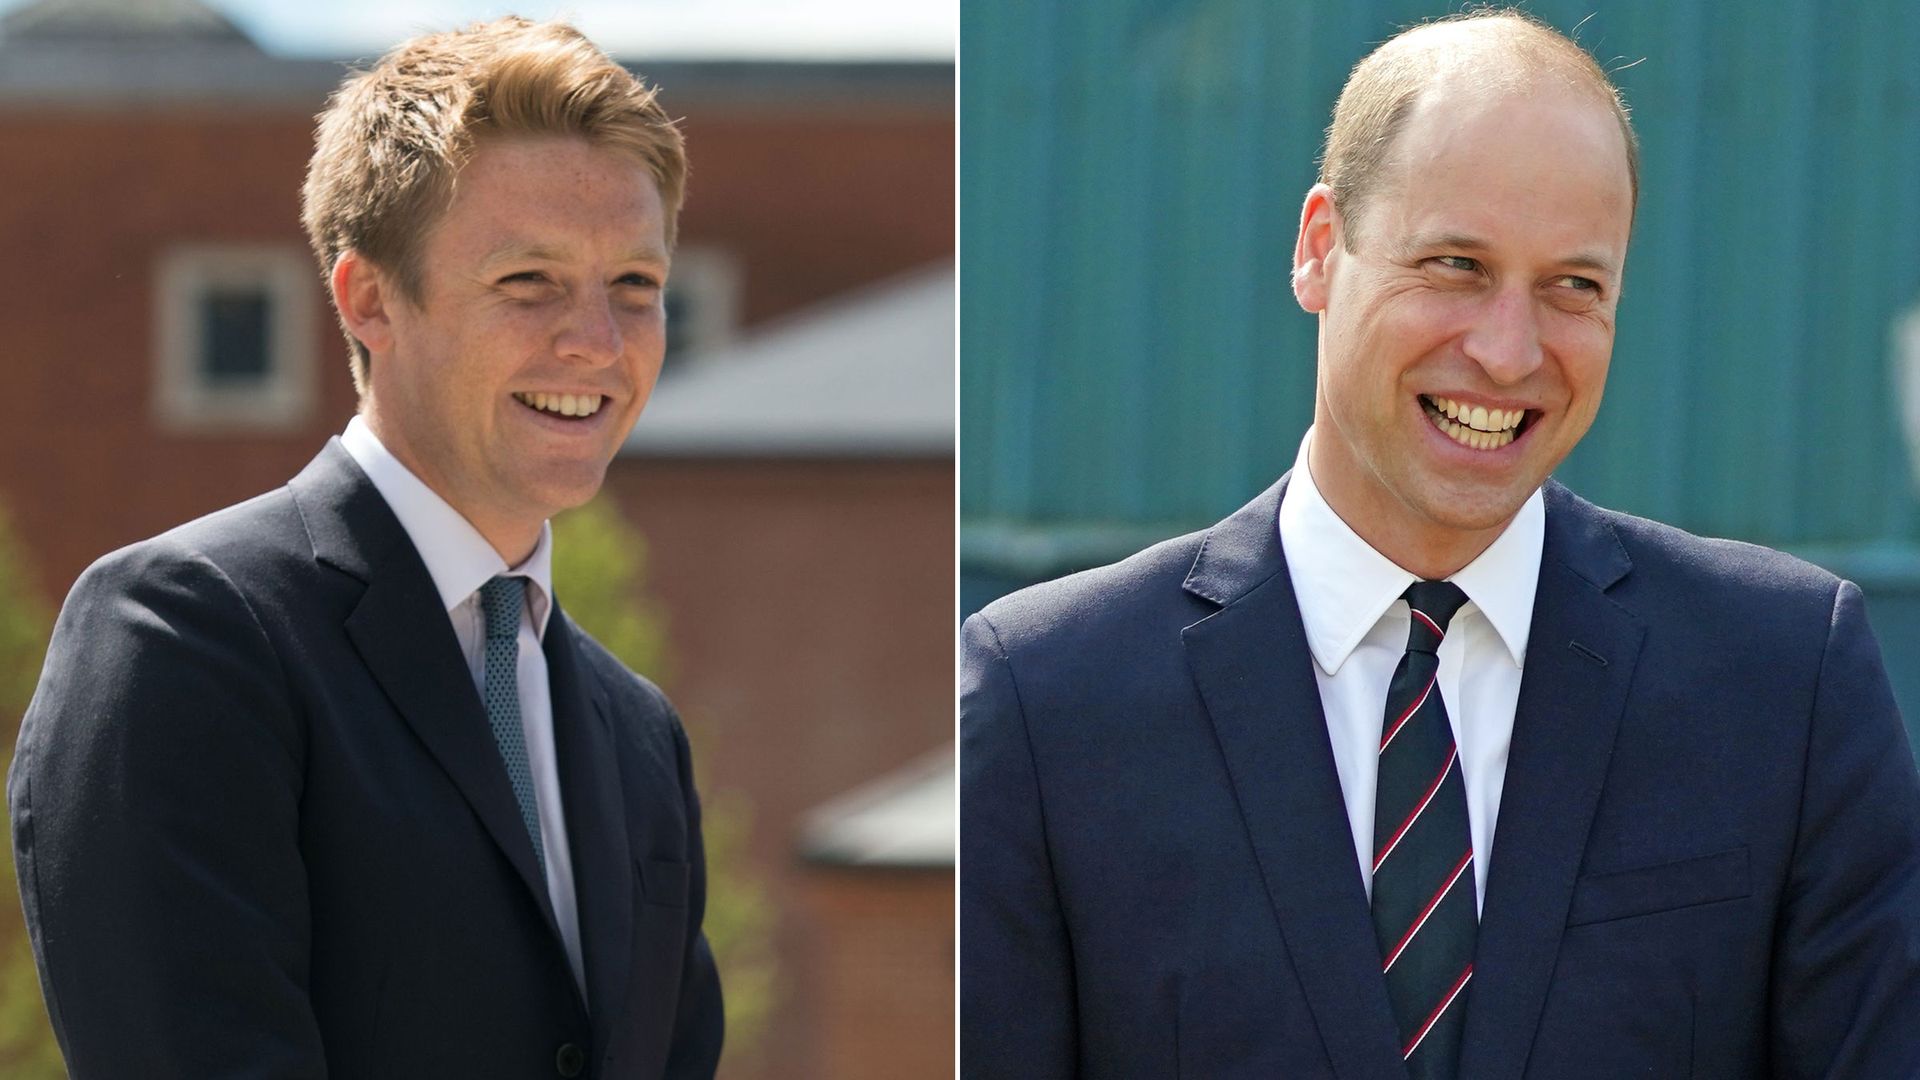 Prince William set to play key role at Duke of Westminster's wedding that Princess Kate will likely skip - report